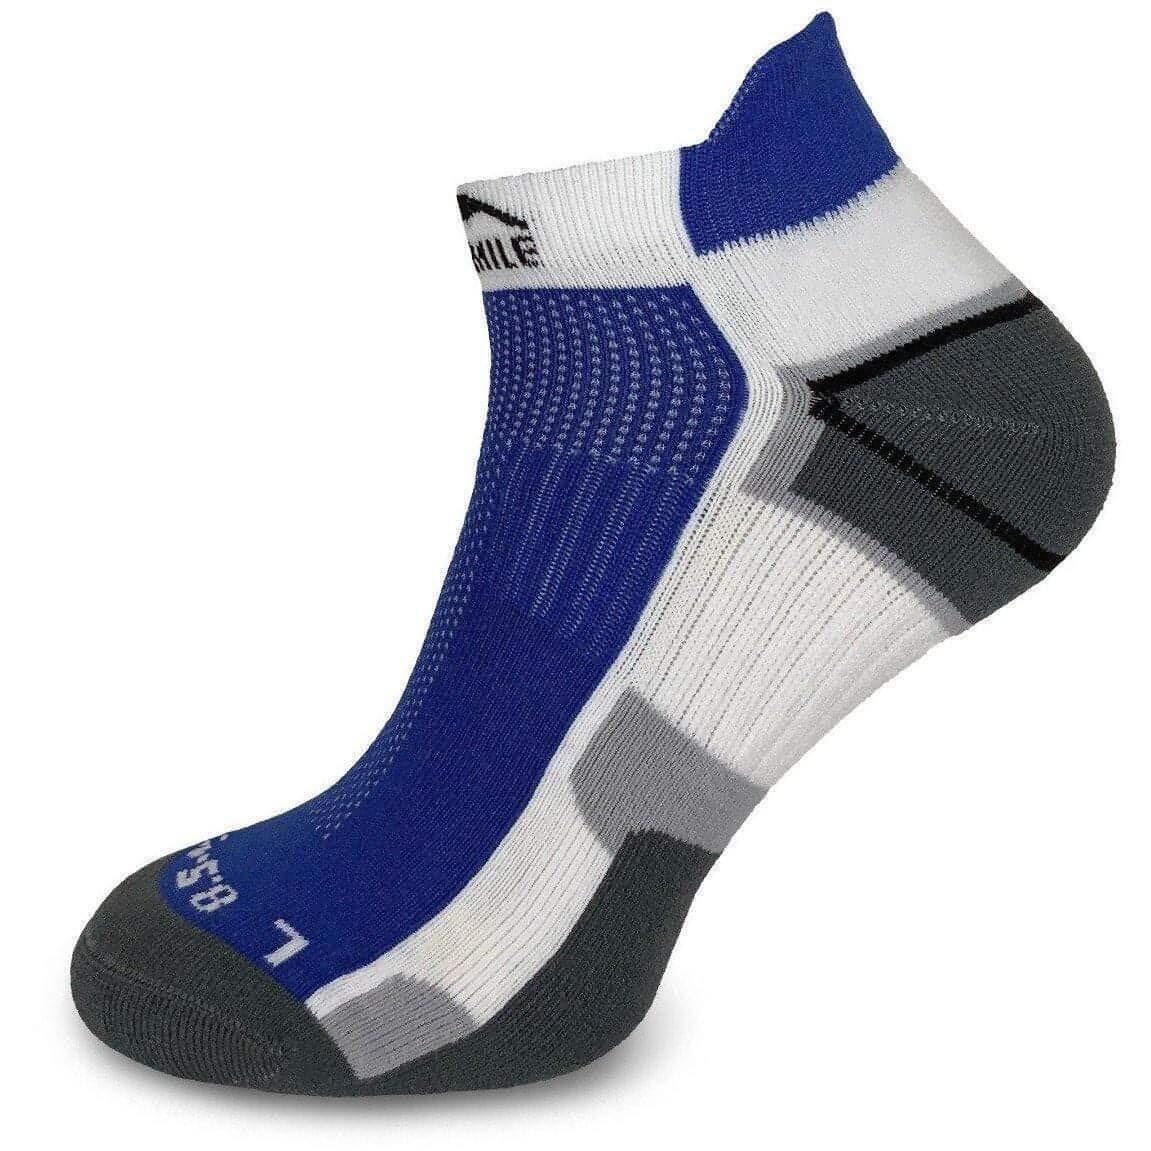 More Mile Miami Running Socklet - Blue